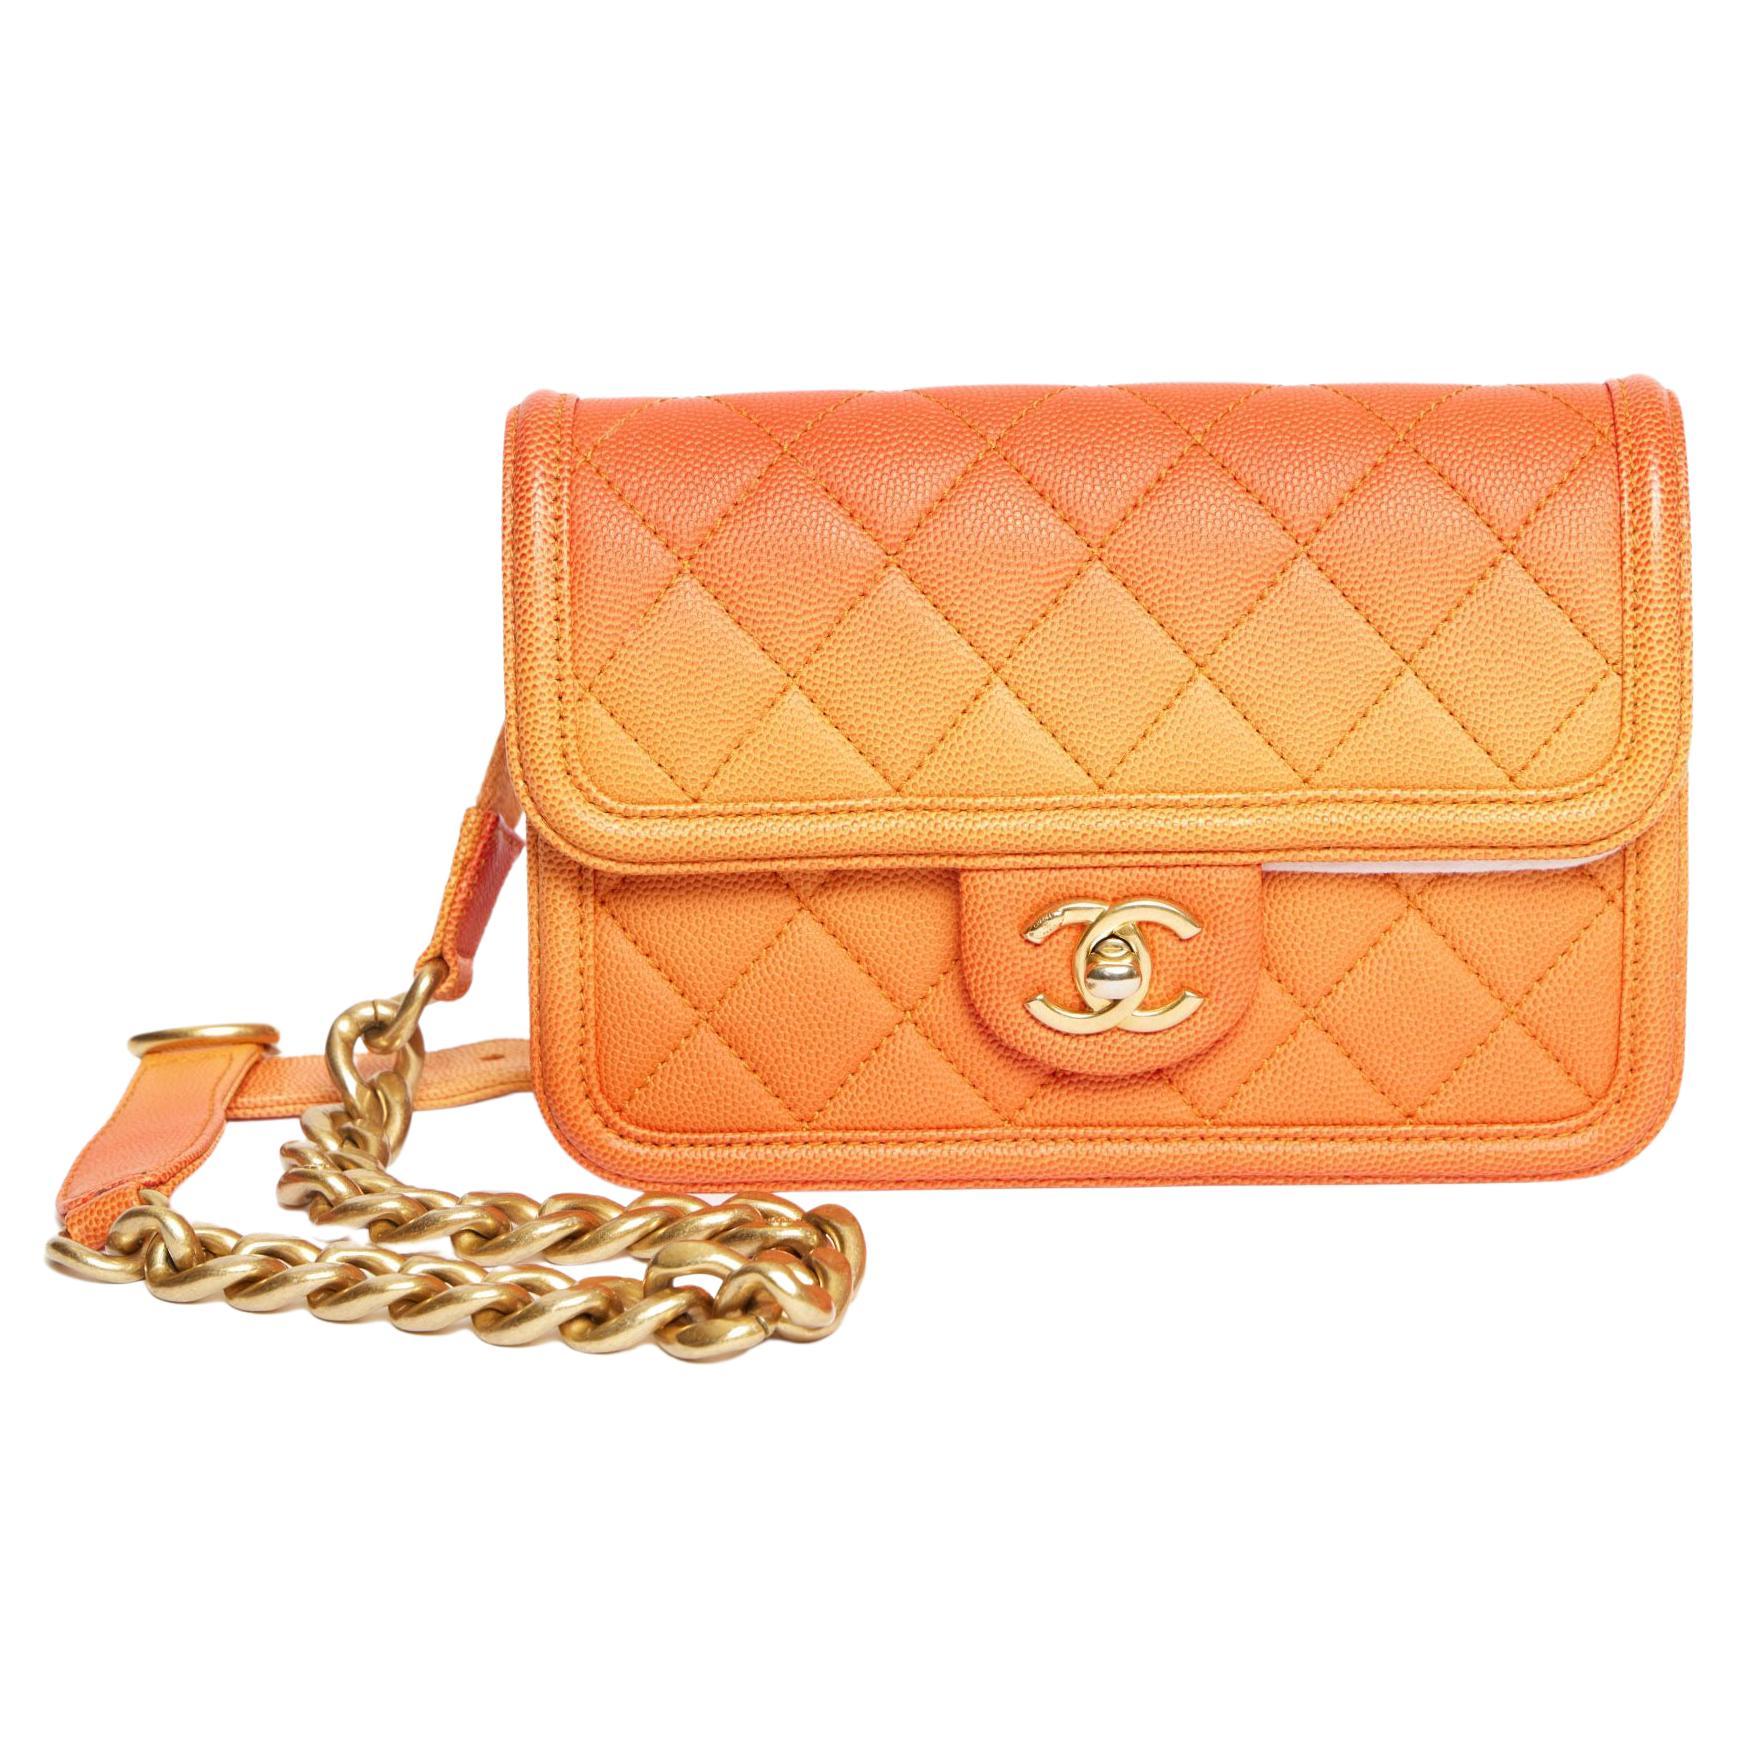 Chanel Cruise Bag - 54 For Sale on 1stDibs  chanel cruise 2019 bags, chanel  cruise 2018 bags, chanel 2019 cruise collection bags